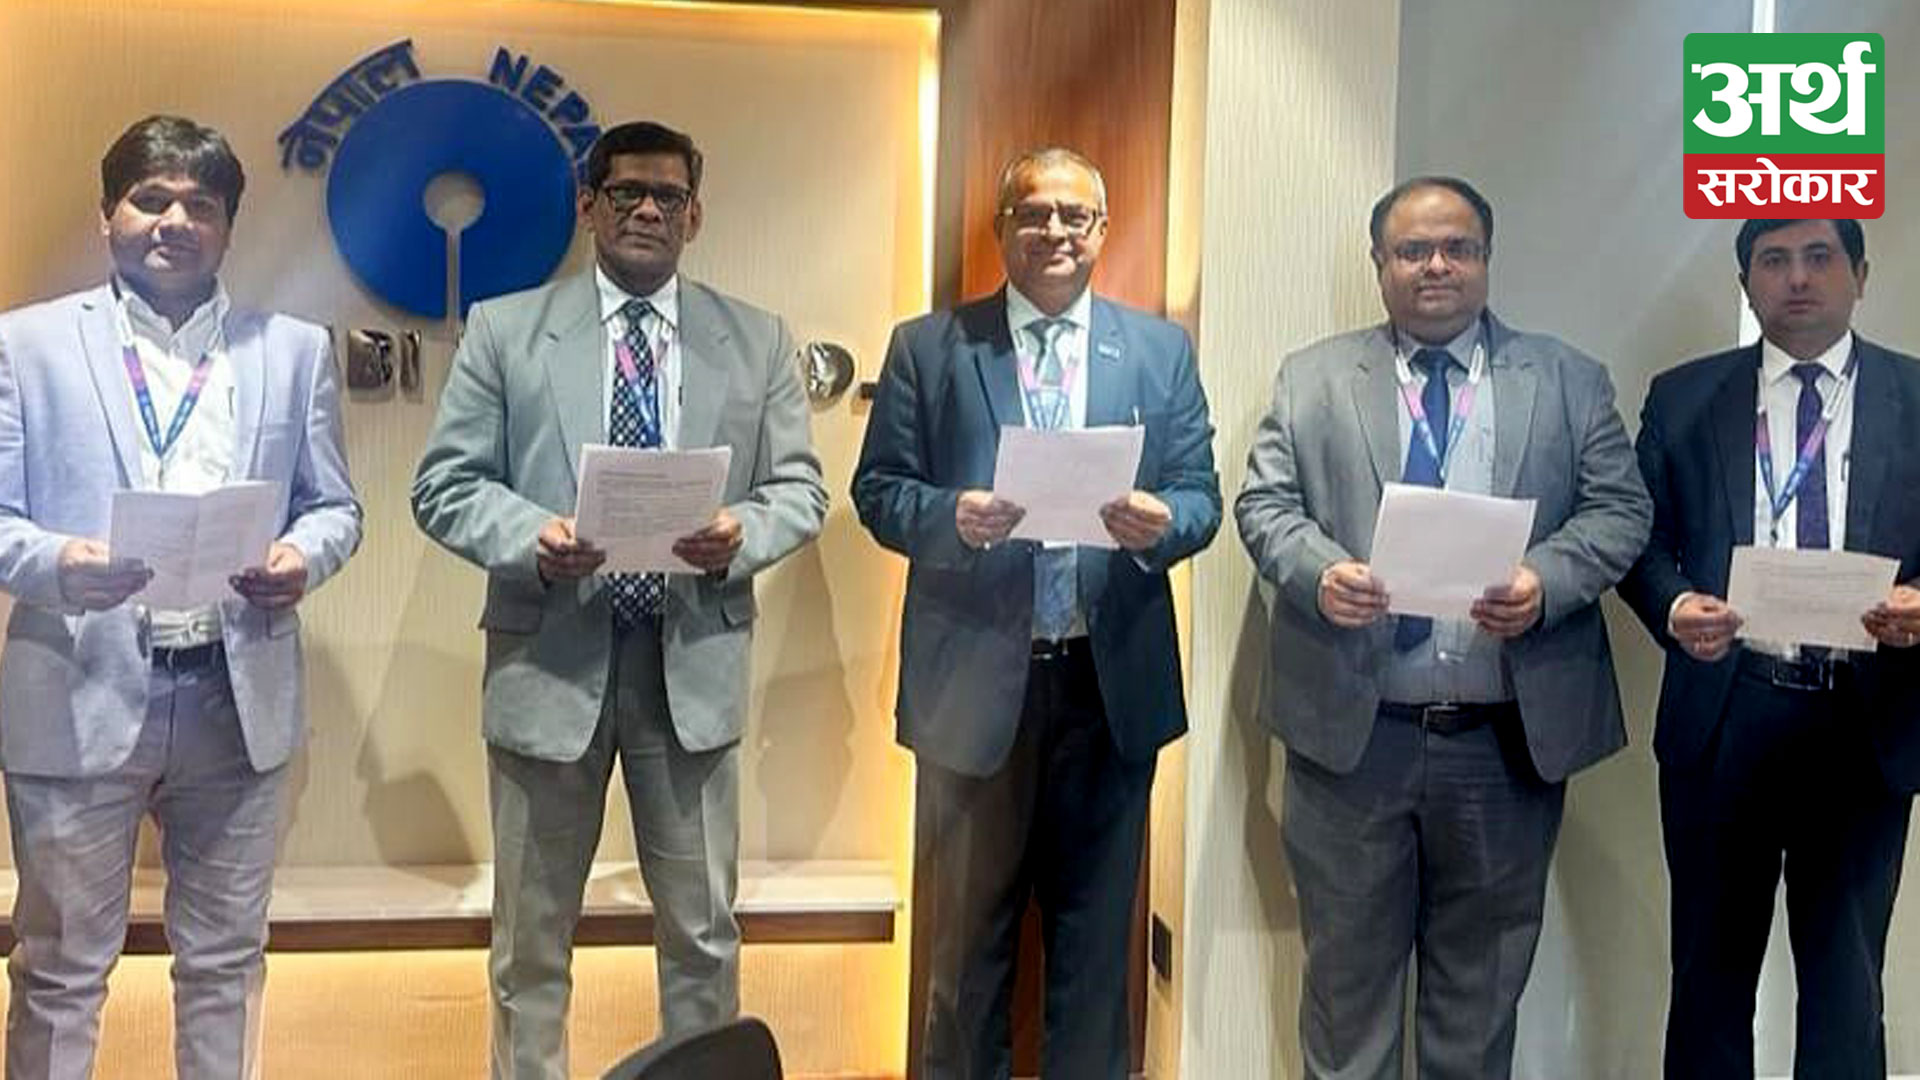 Nepal SBI Bank employees pledge on Data Privacy Day